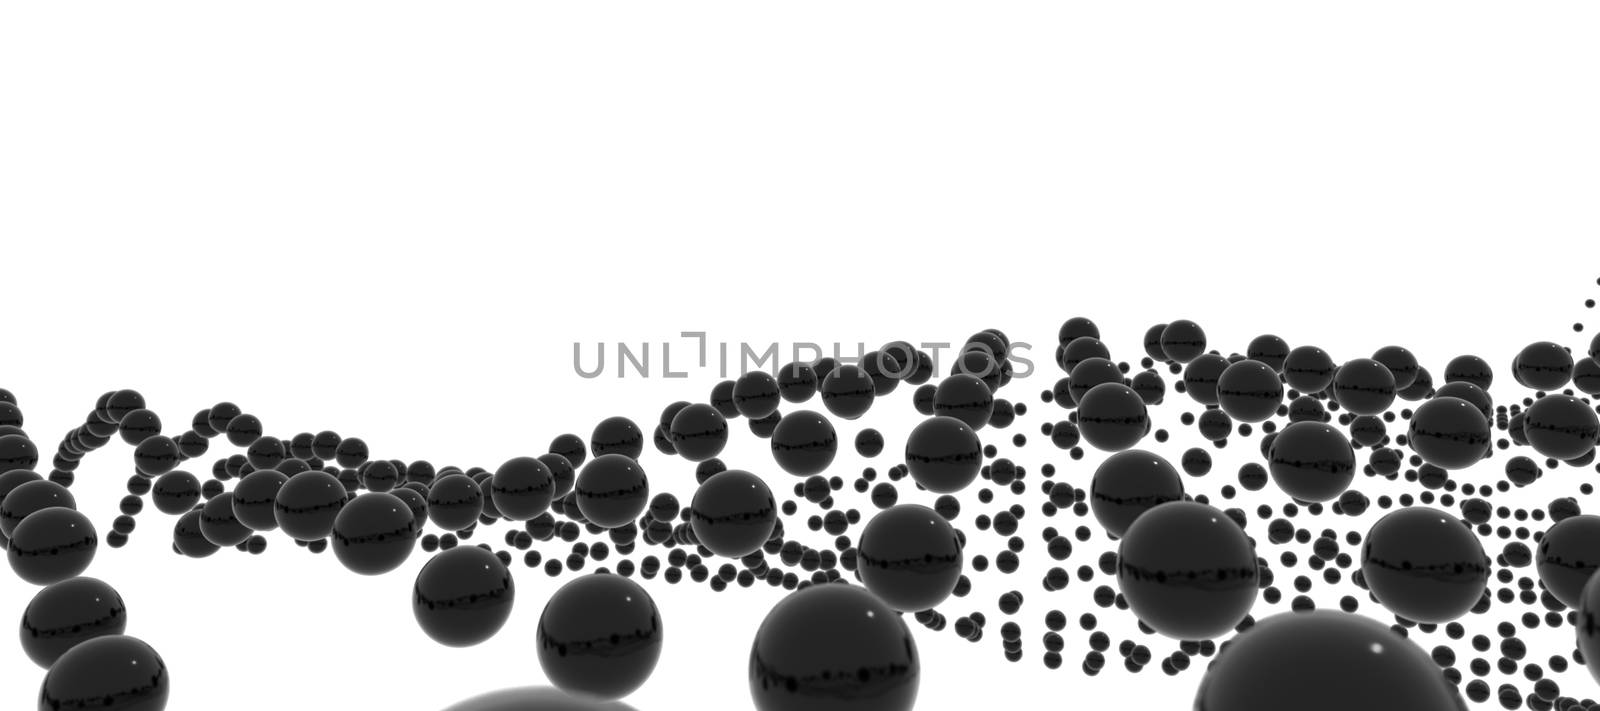 Futuristic Dots Pattern. Technology Background or Abstract Digital Space. 3D Illustration